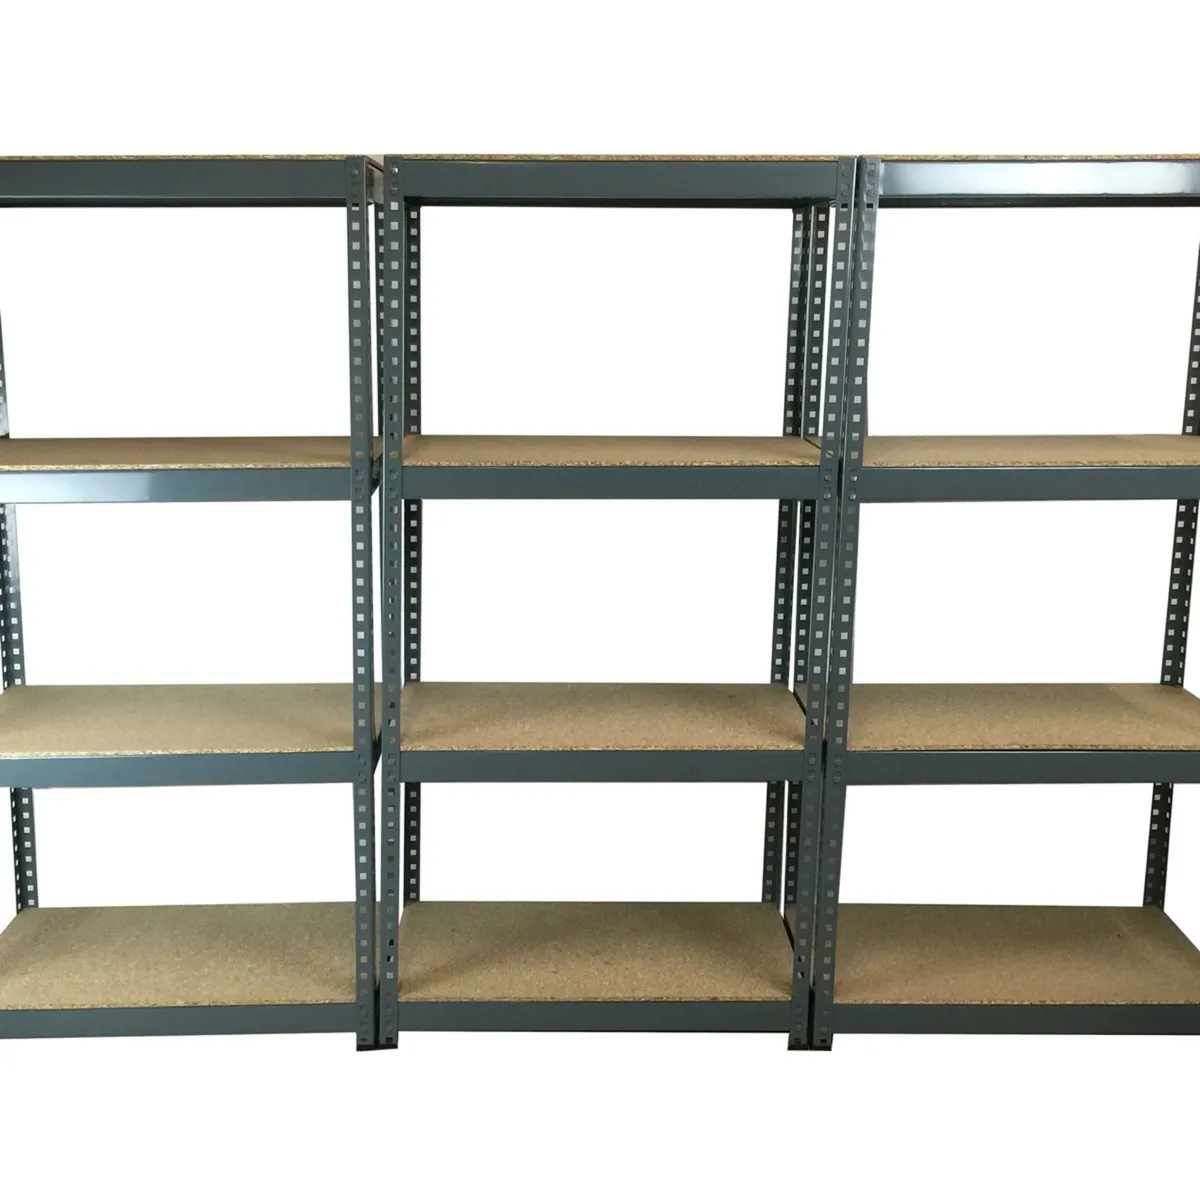 3 bays of shelving only €125+vat 1500h X 2200L